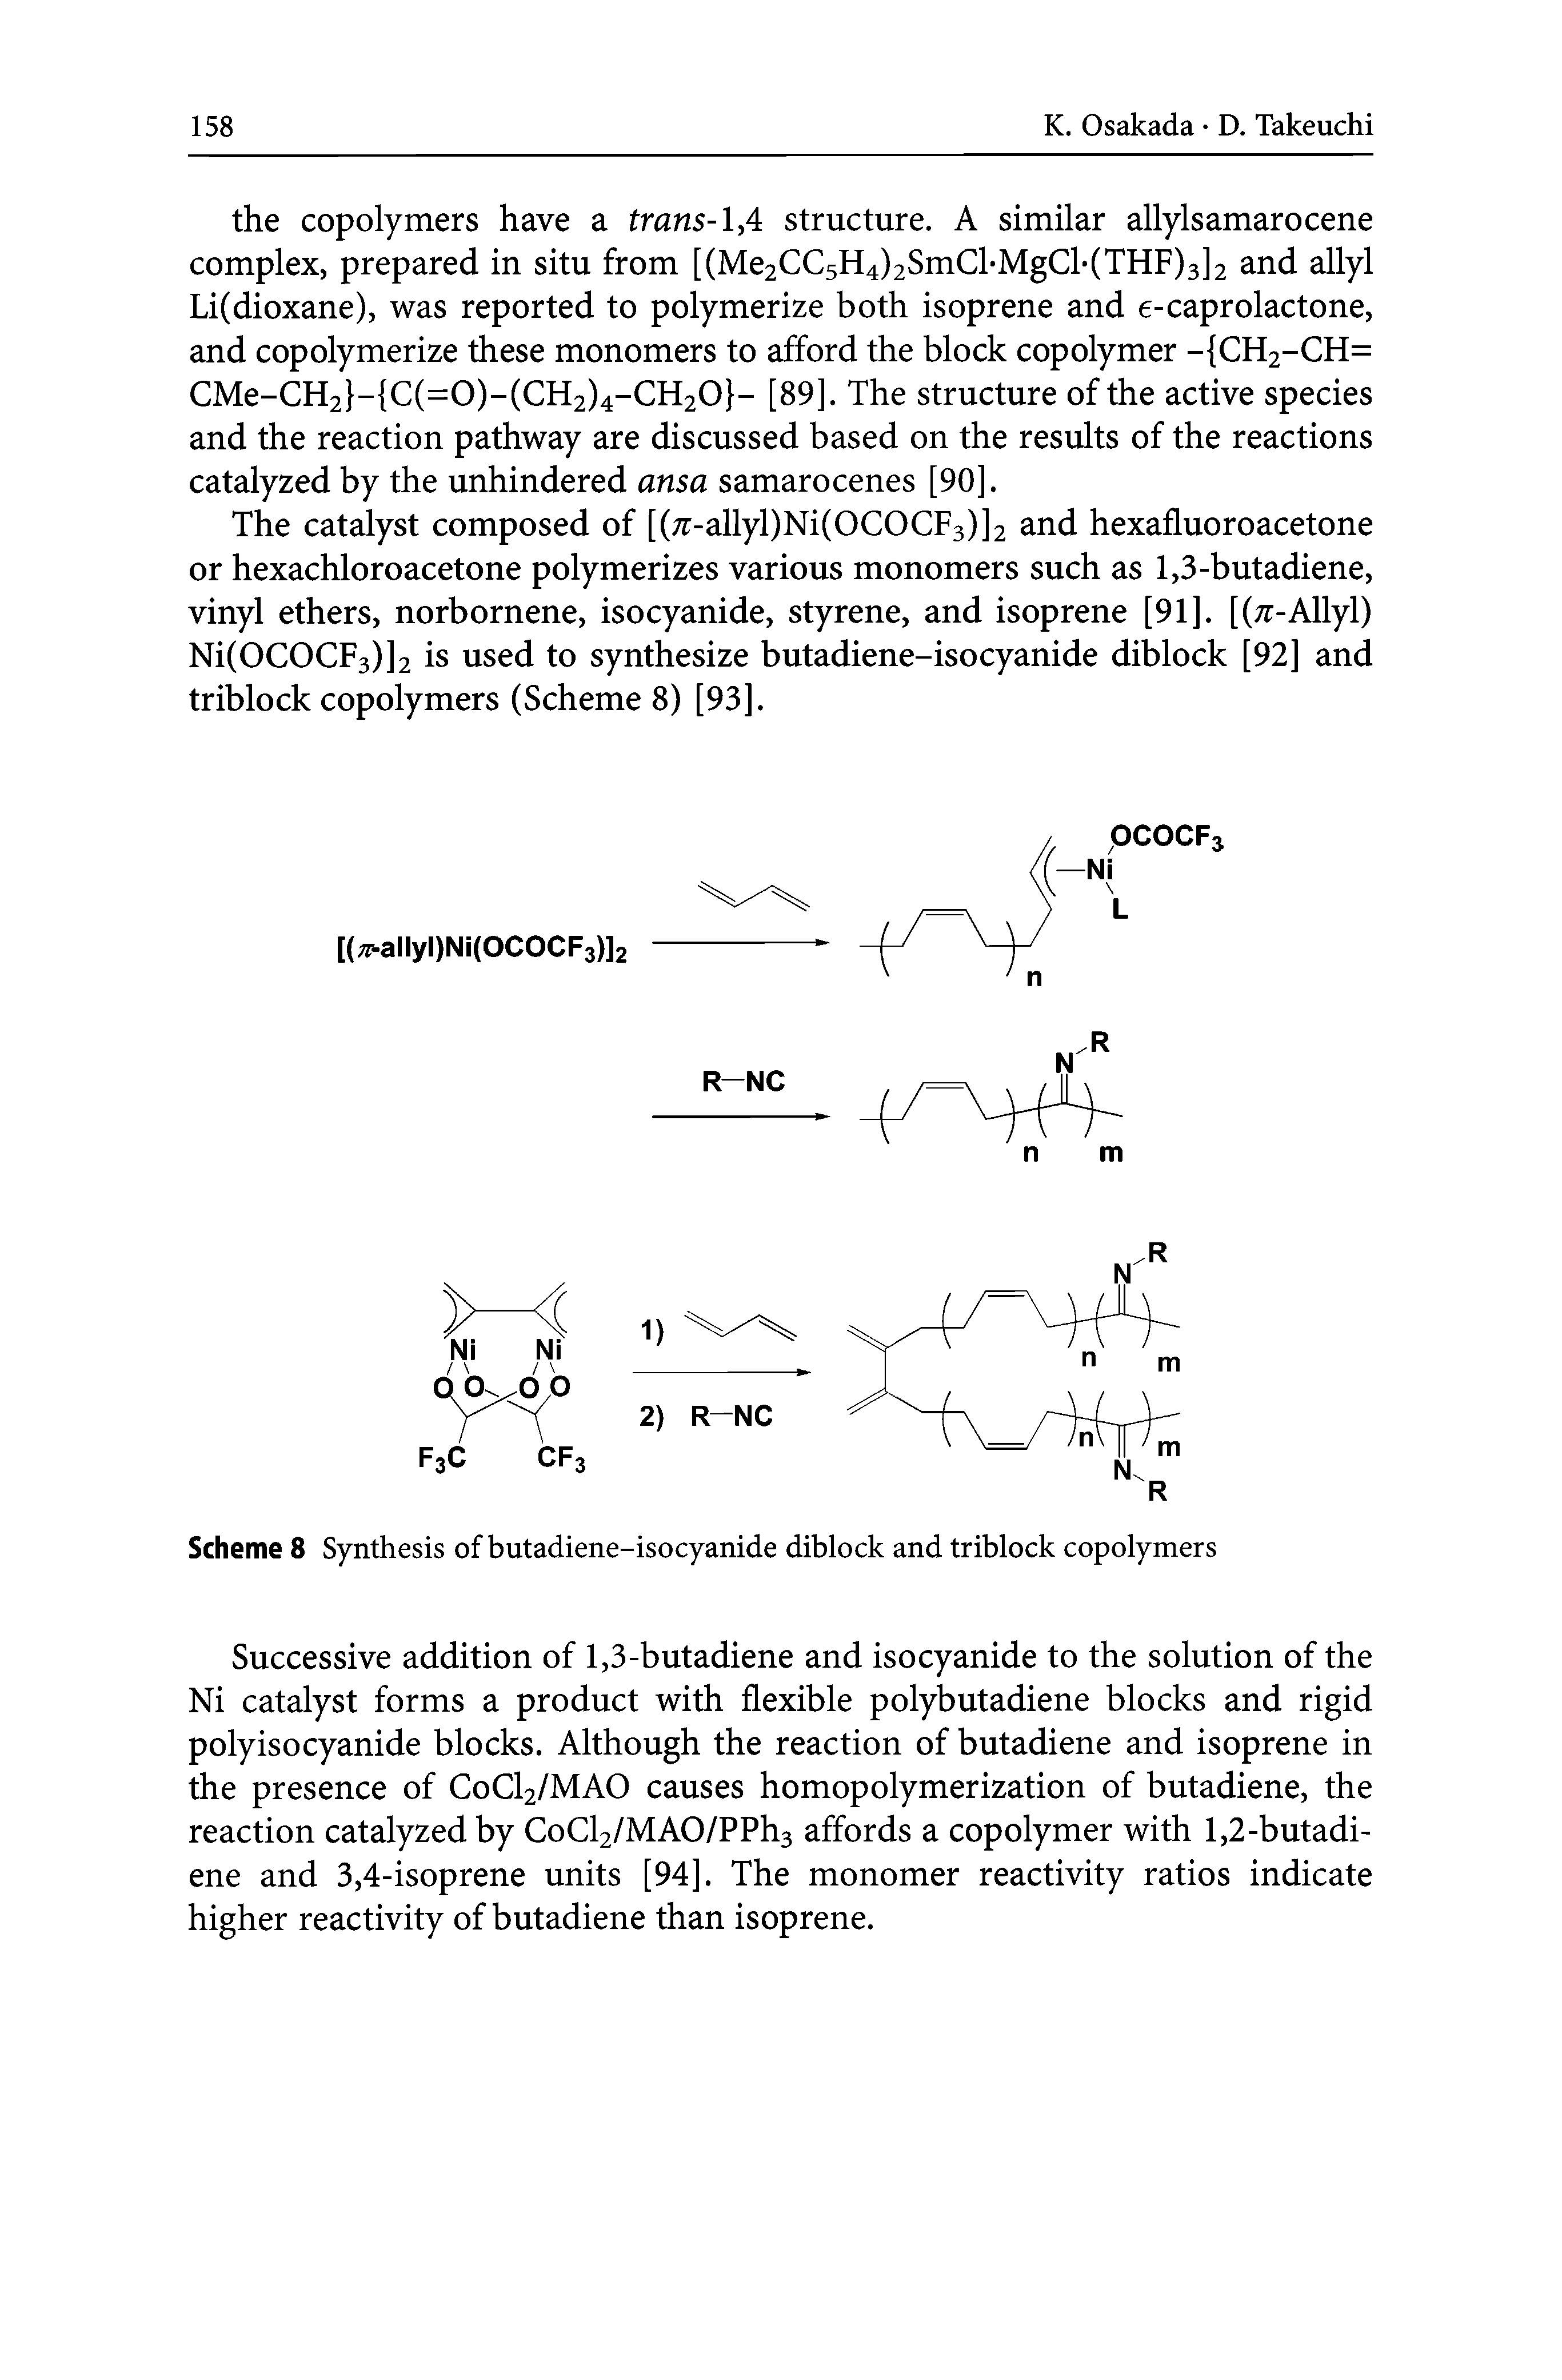 Scheme 8 Synthesis of butadiene-isocyanide diblock and triblock copolymers...